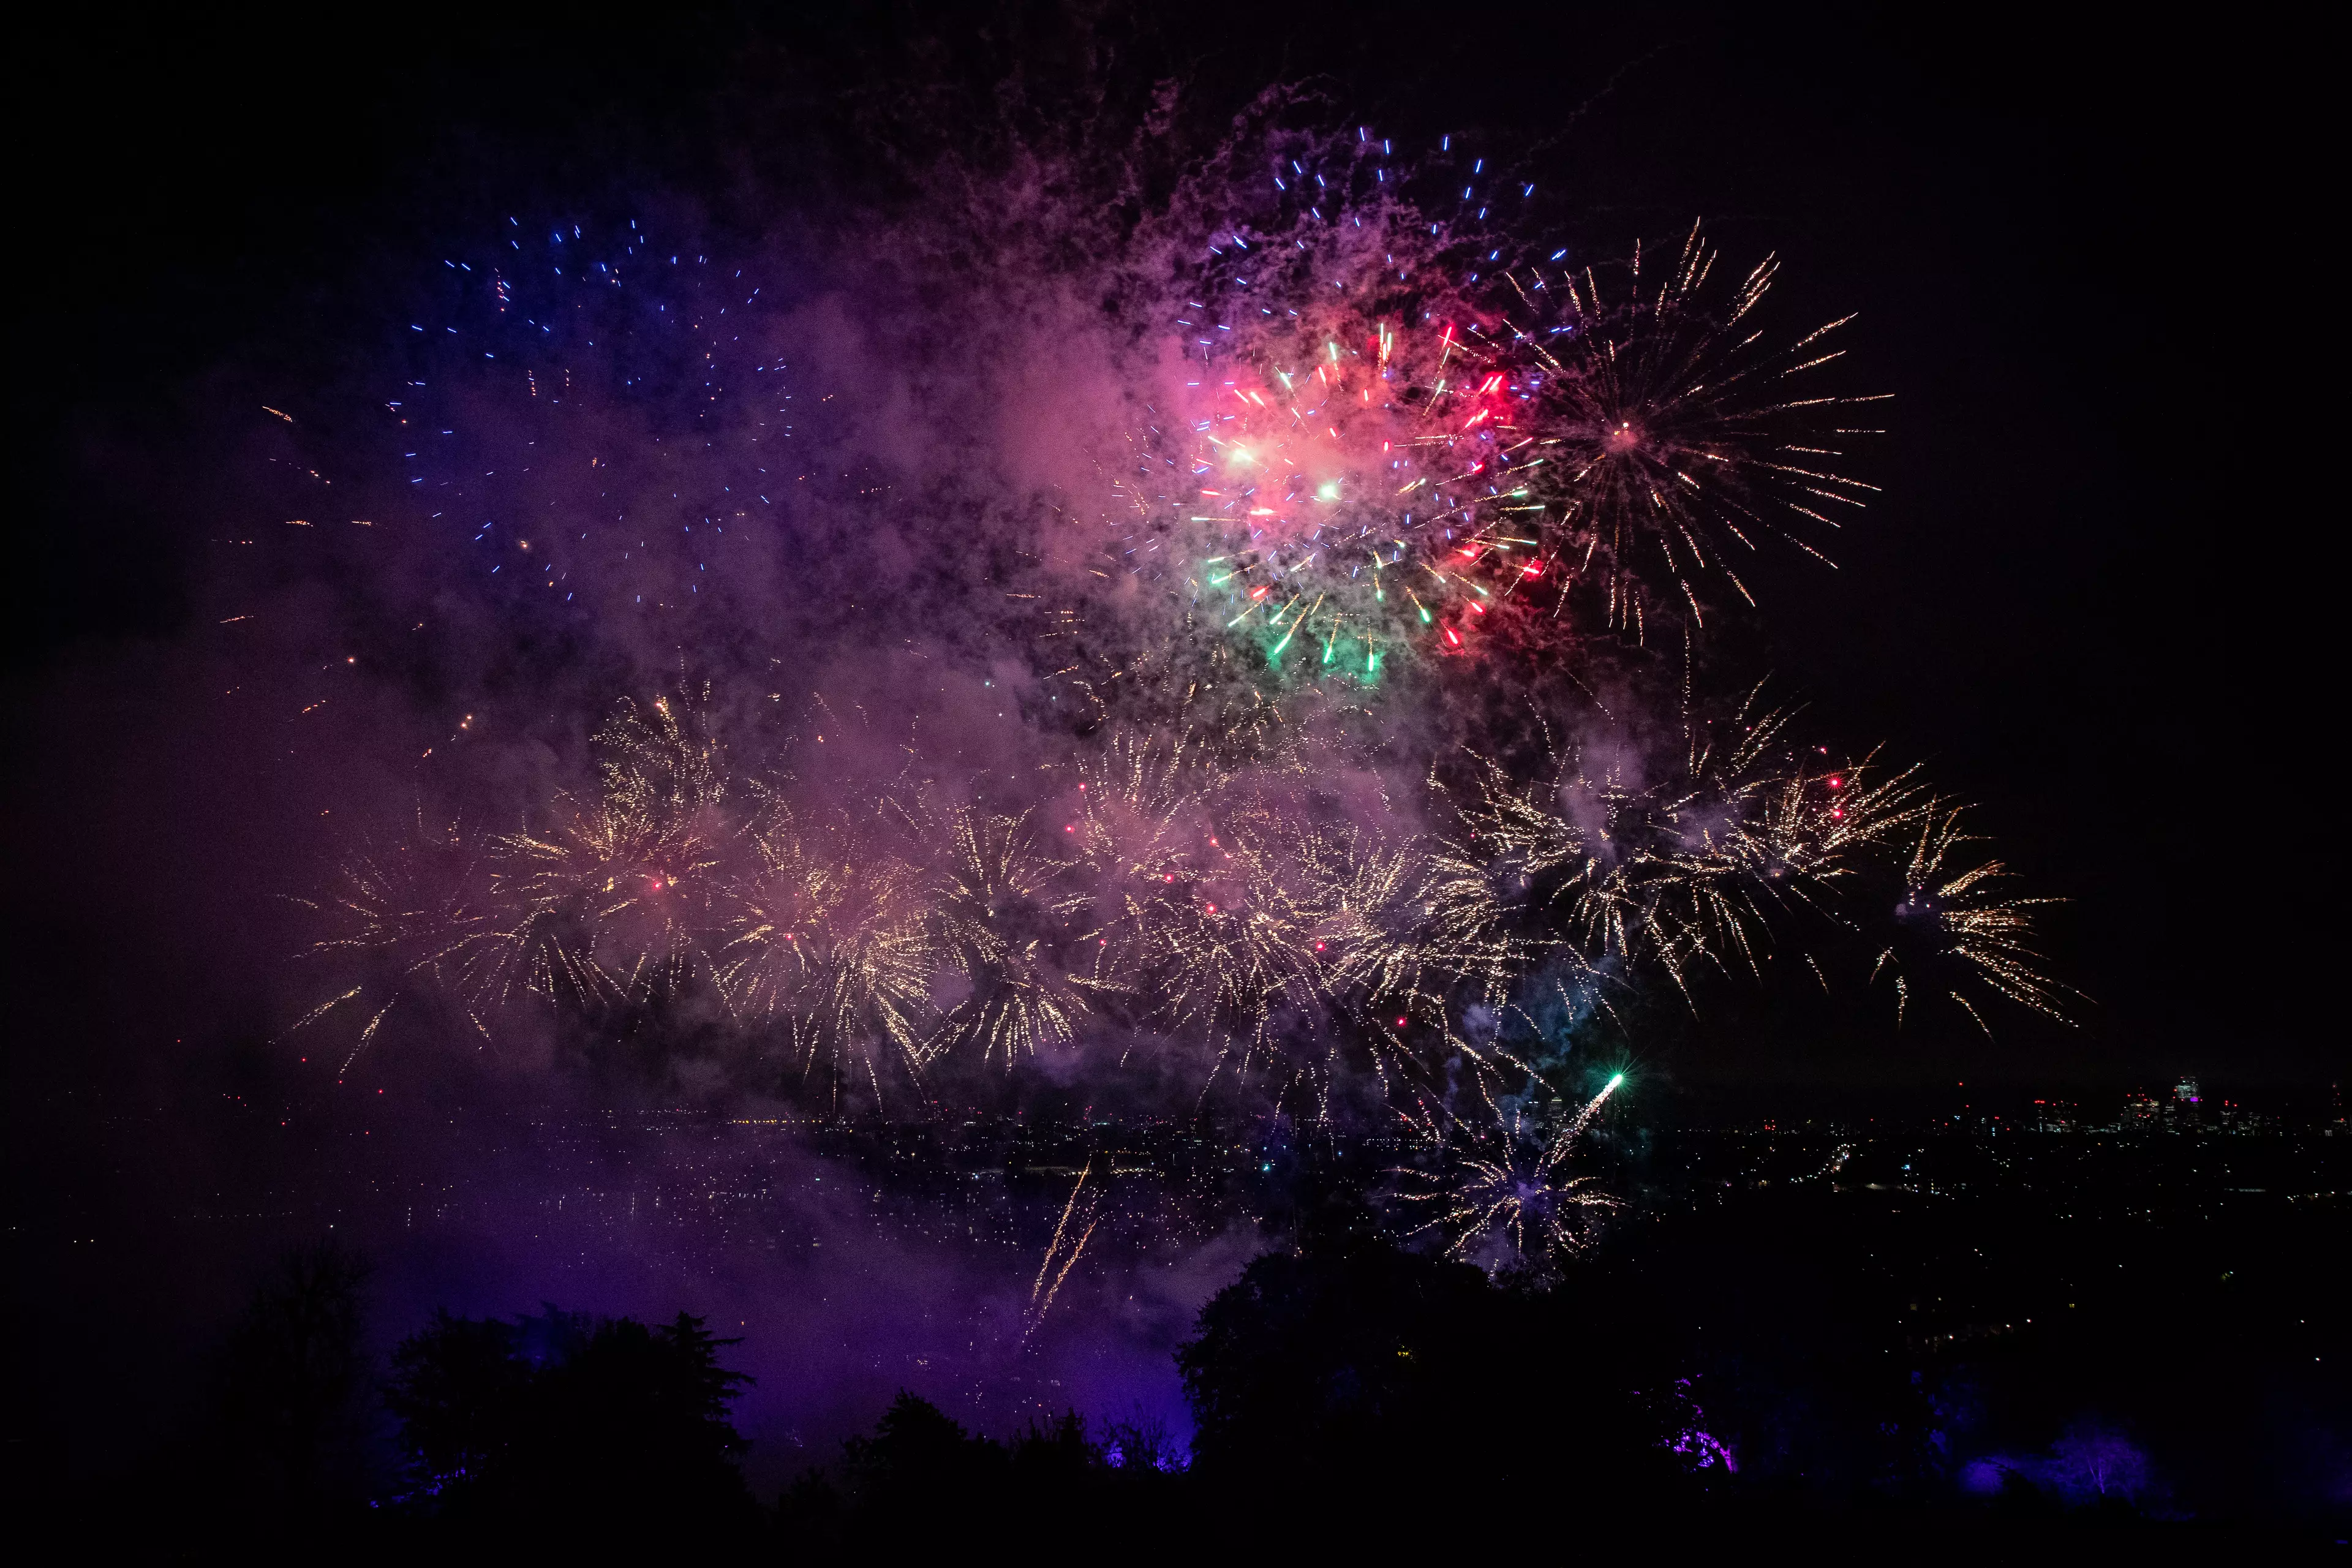 More than 170,000 people have signed a petition calling for the general sale of fireworks to be banned.